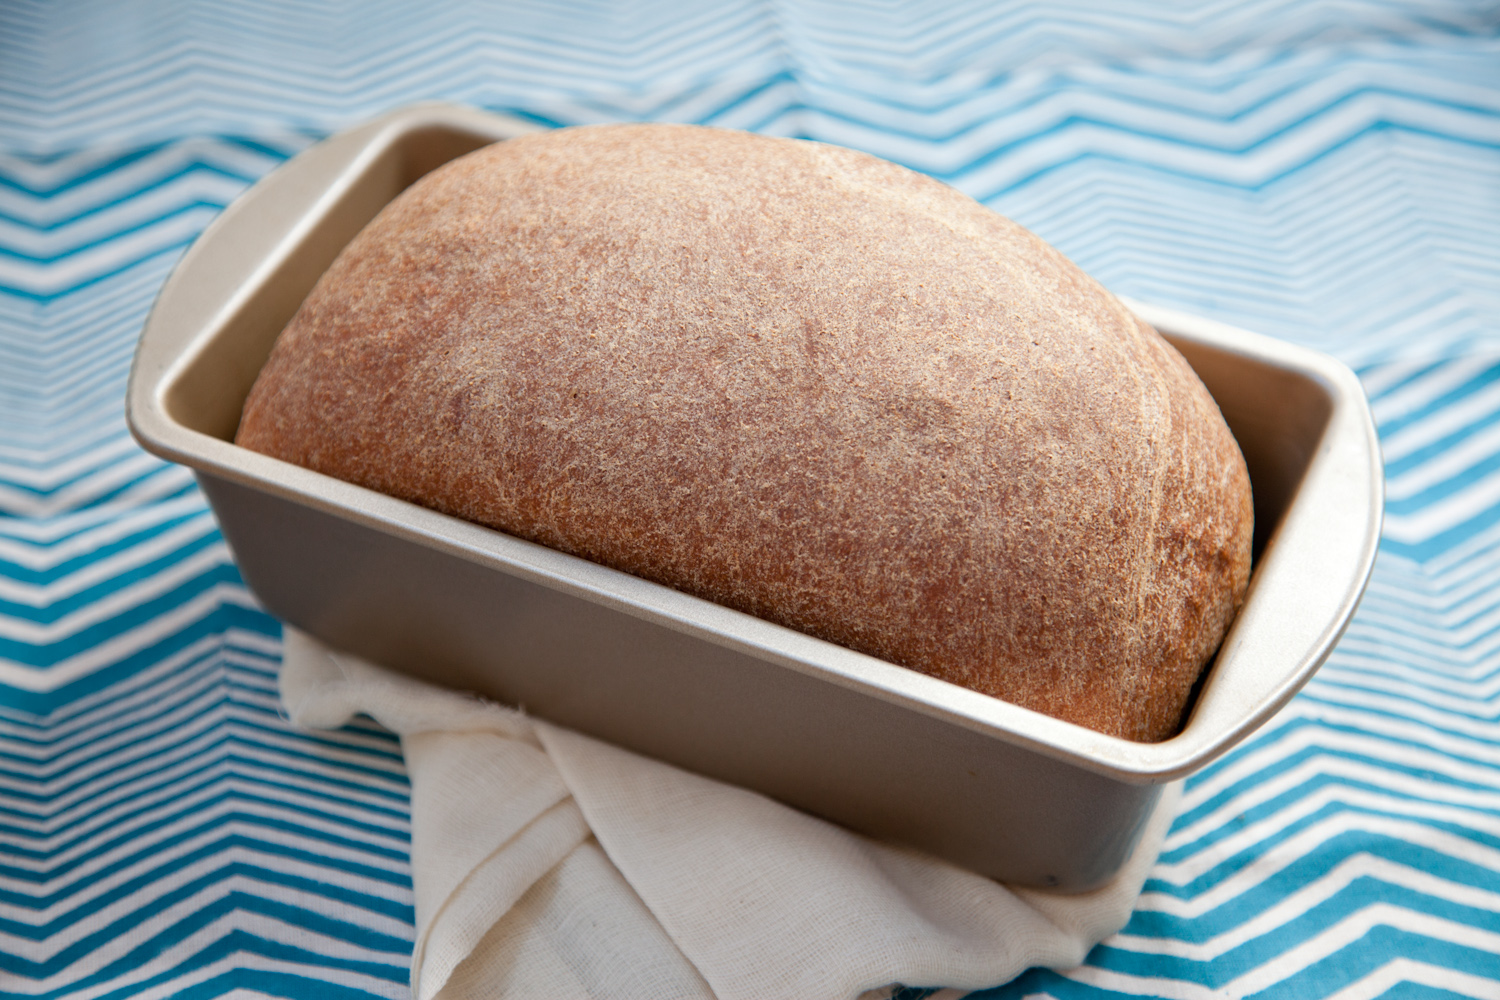 Whole Wheat Bread (with Homemade Whole Wheat Flour)